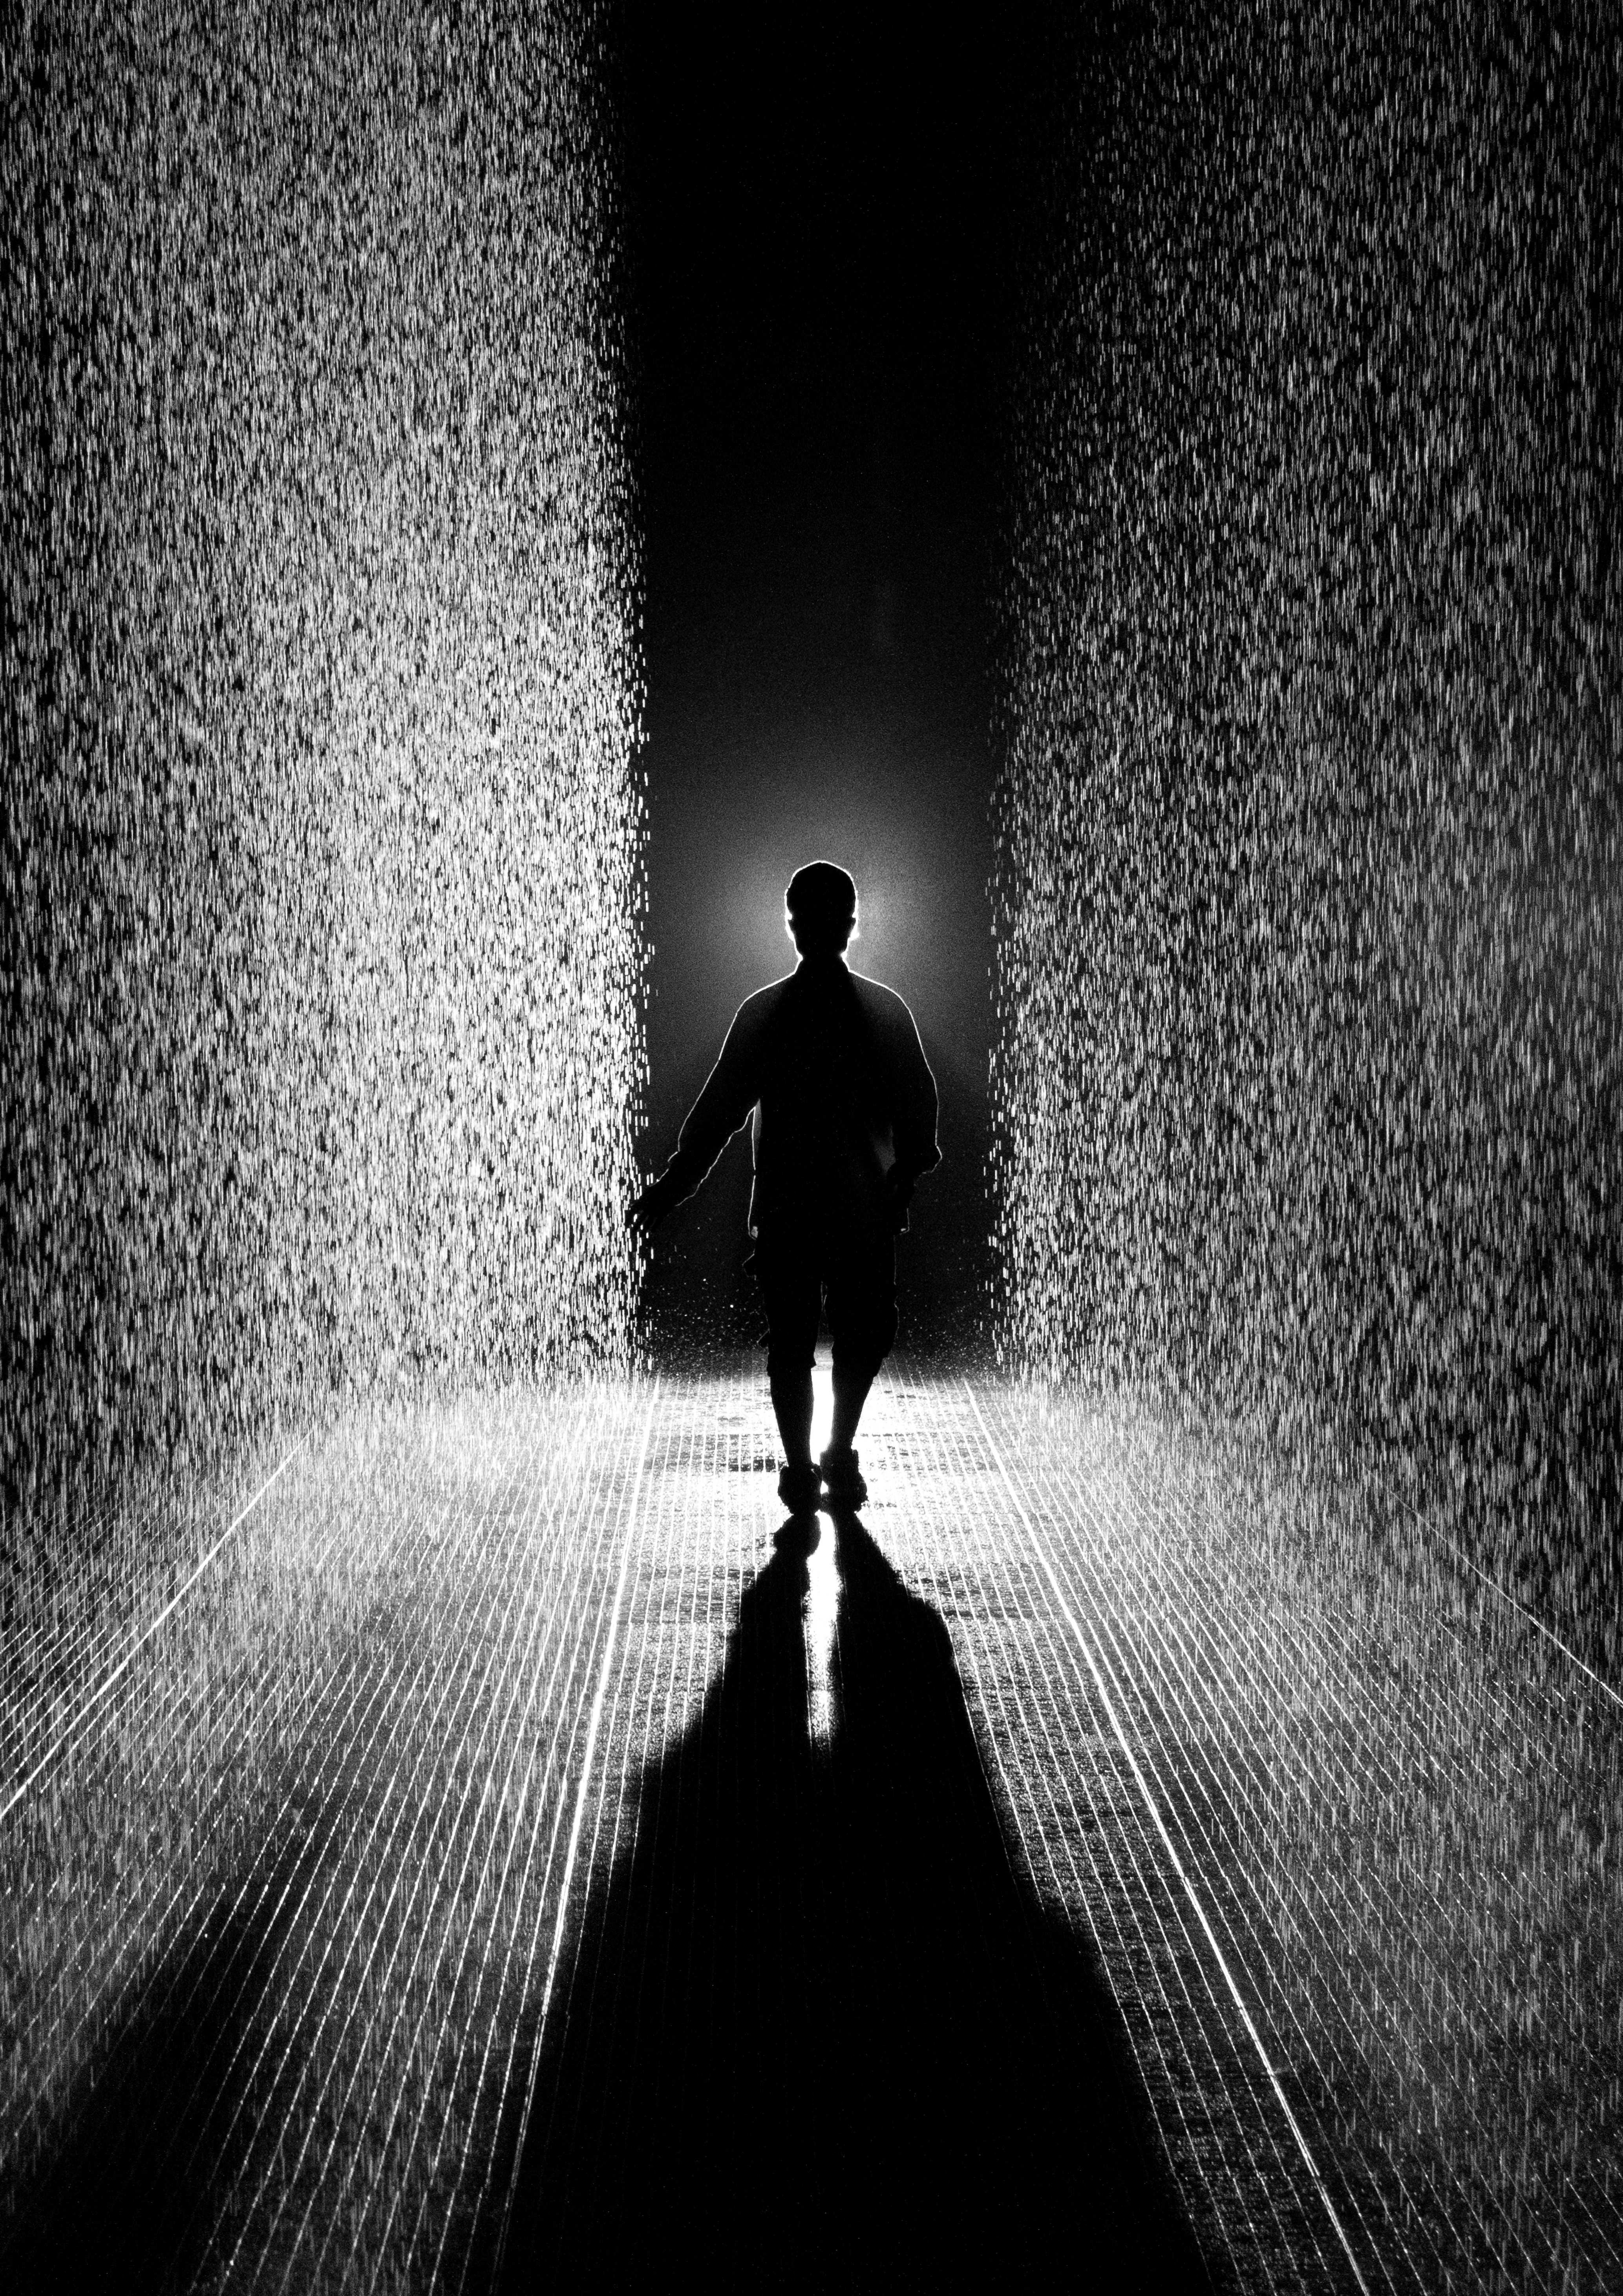 The Prince Hotel, in Melbourne’s edgy St Kilda suburb, hosts Random International’s Rain Room, an interactive exhibition featuring an 100-square-metre field of continuous rainfall, in its rooftop art space.